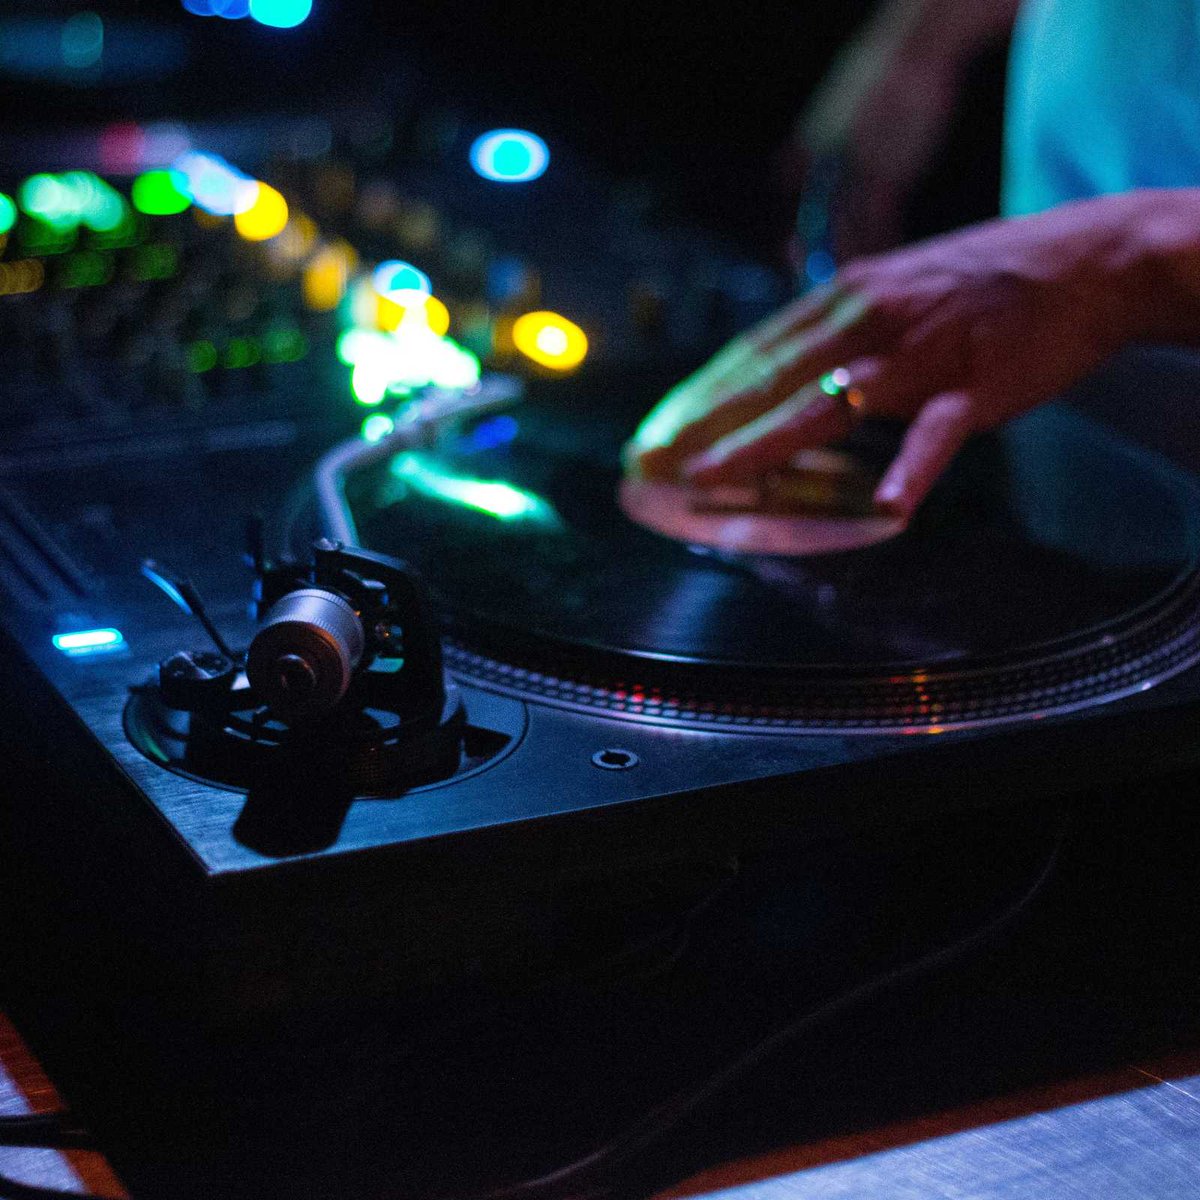 Missed DJ Artwork's live set last night? Don't worry, he's back tonight at 9pm with hip hop, top 40s, dancehall, and more in the mix. We'll see you tonight 🔥
#beaumonde #livedj #atldj #atllivemusic #atlcigars #alpharetta #johnscreek #atlnightlife